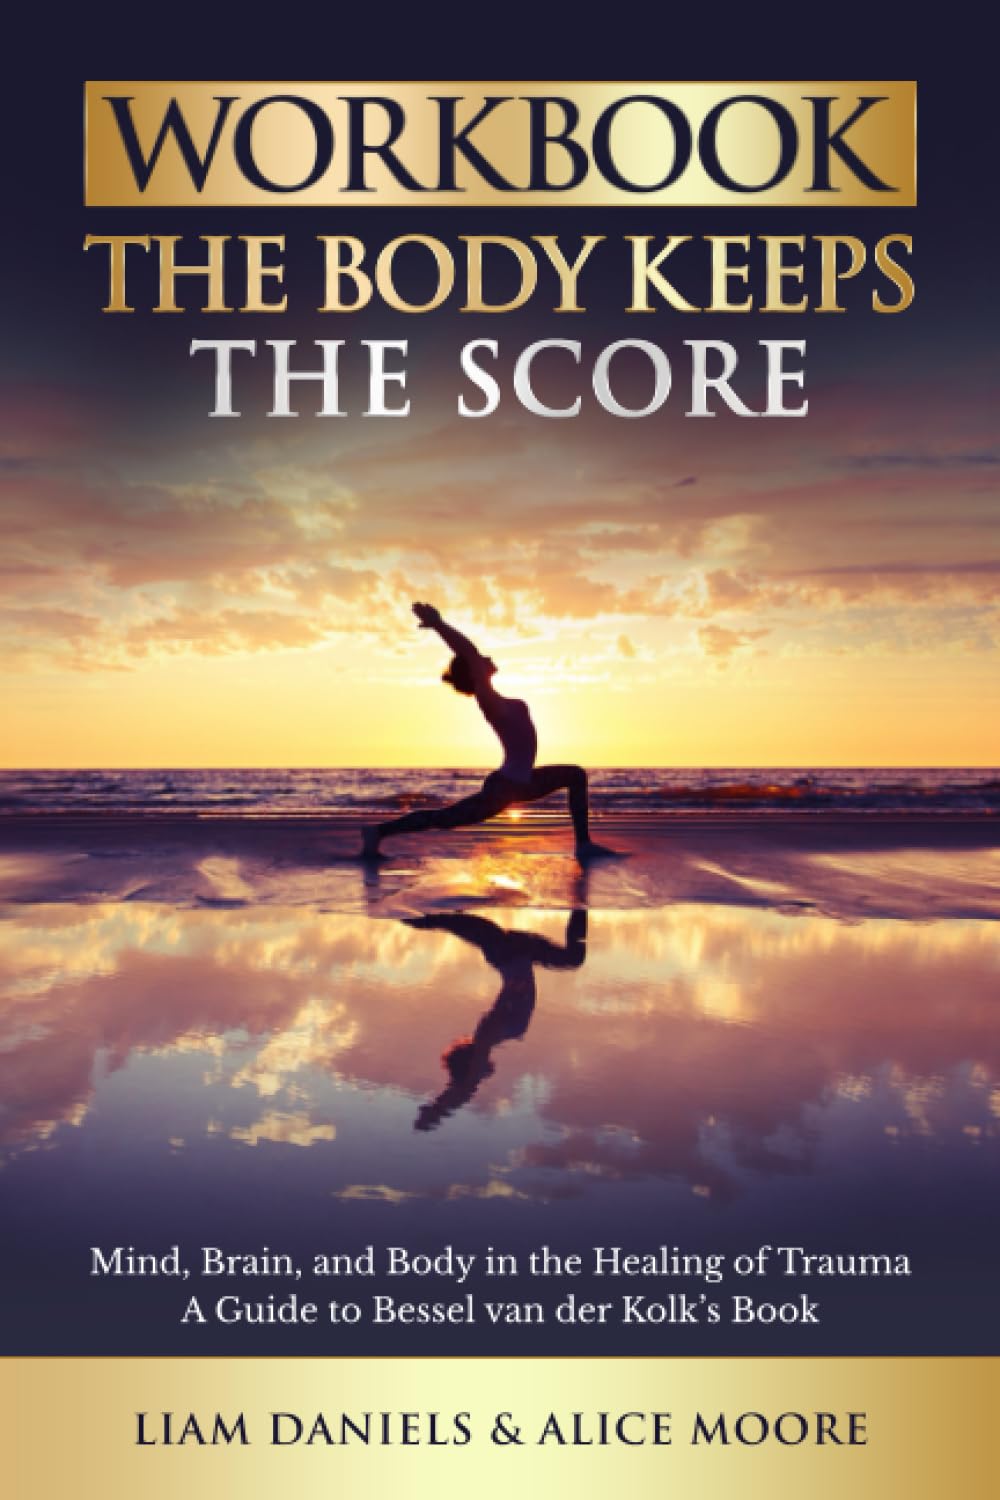 Featured Image for Workbook: The Body Keeps the Score: Brain, Mind, and Body in the Healing of Trauma (Healing Books)